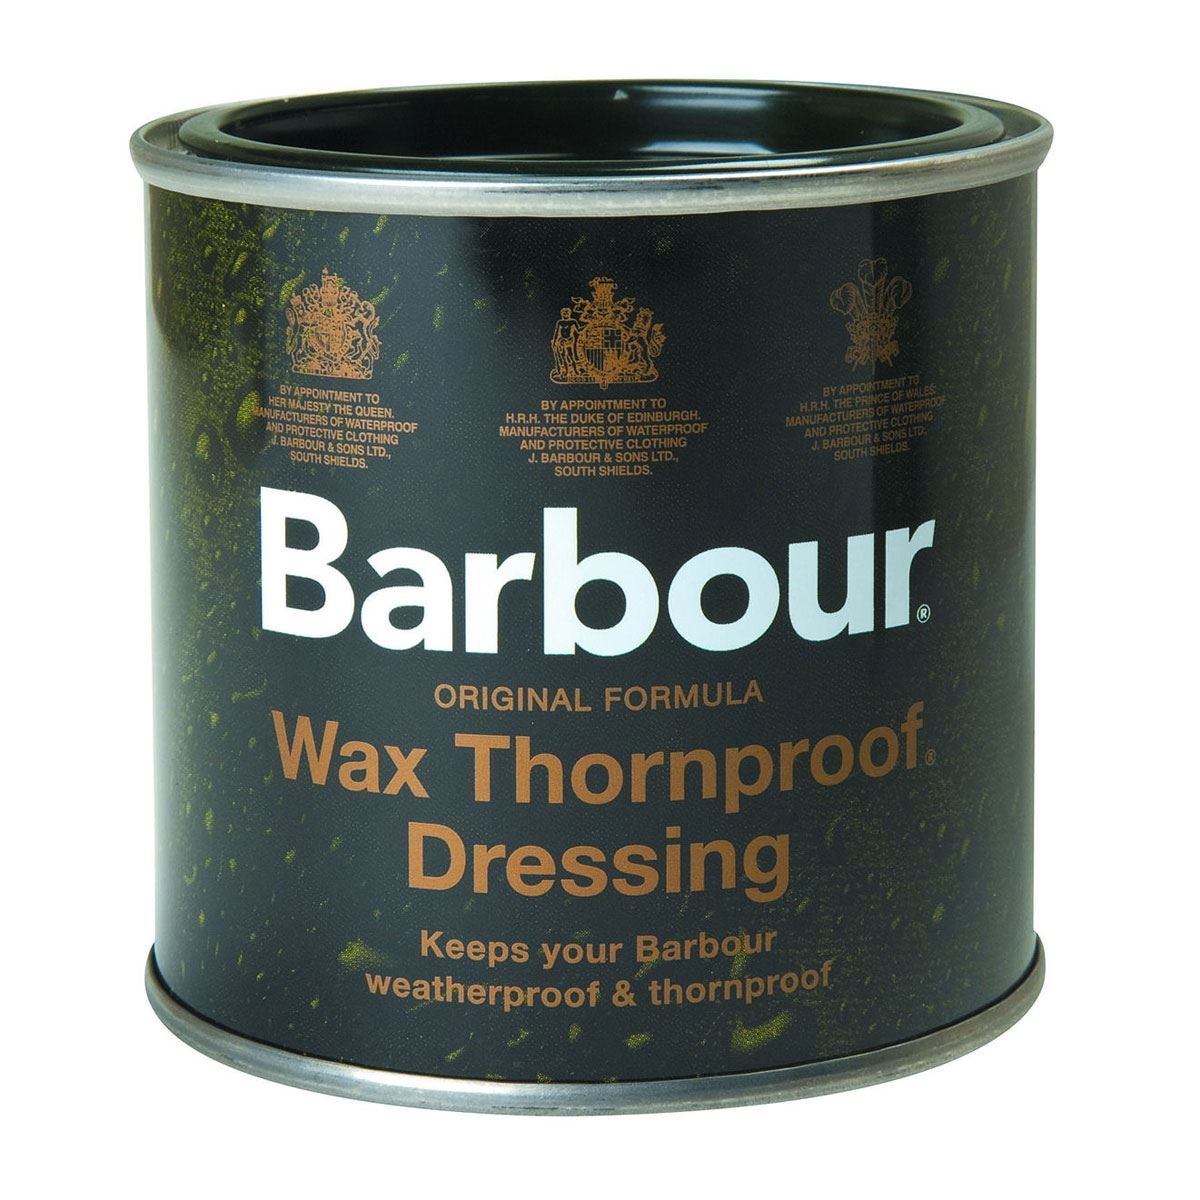 What is the reason for the order limit on Barbour wax?